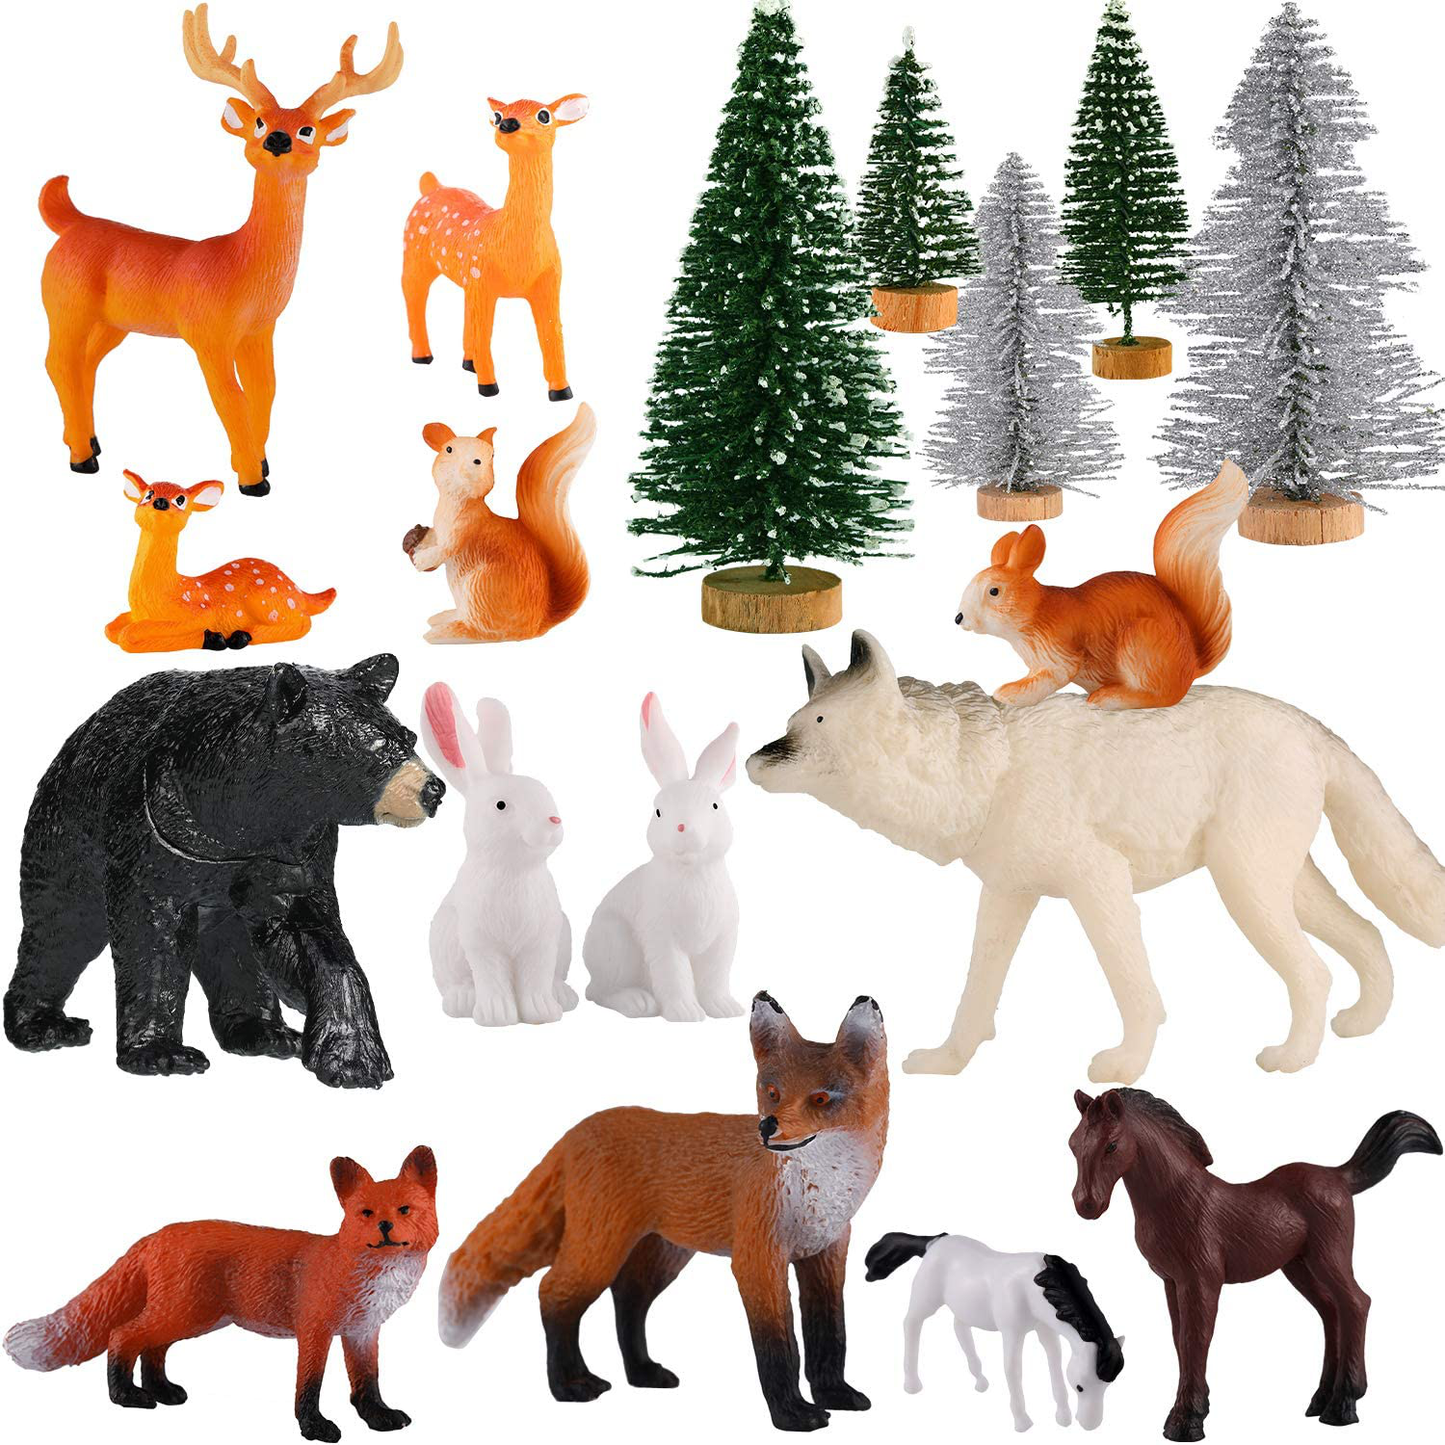 Skylety 18 Piece Christmas Woodland Animals Figurines Woodland Creatures Figurines Realistic Plastic Wild Forest Animals Figurines for New Year Birthday Christmas Party